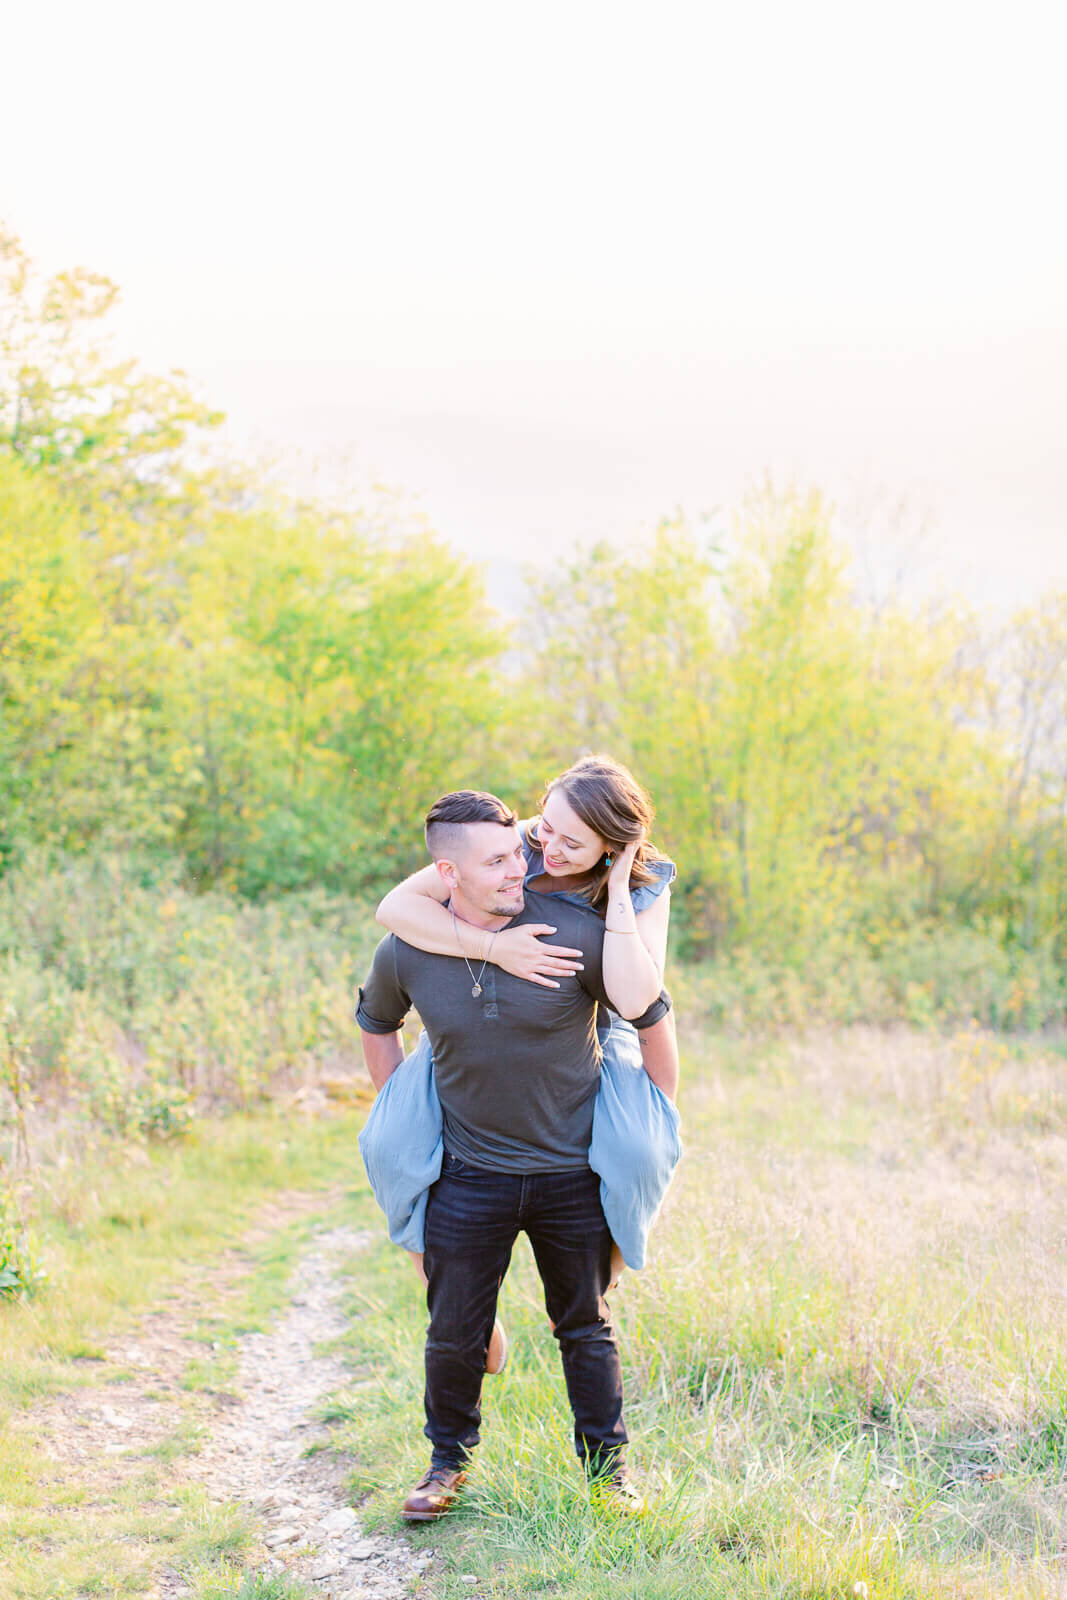 Bride getting a piggyback ride in the mountains during their engagement session in Shenandoah National Park.